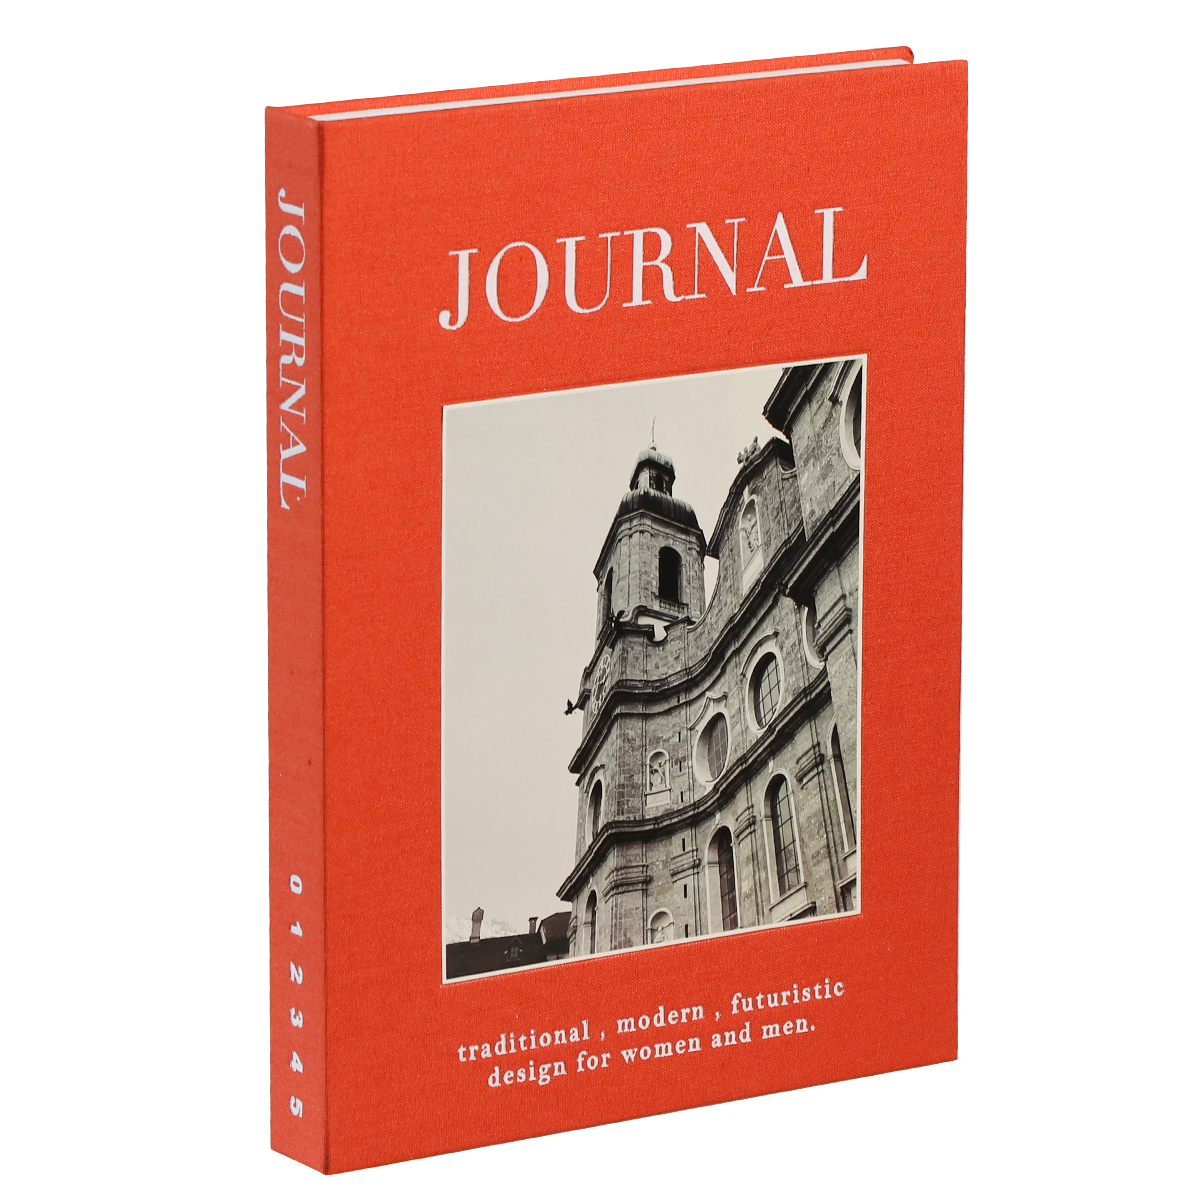 JOURNAL magazine Issue05 at building